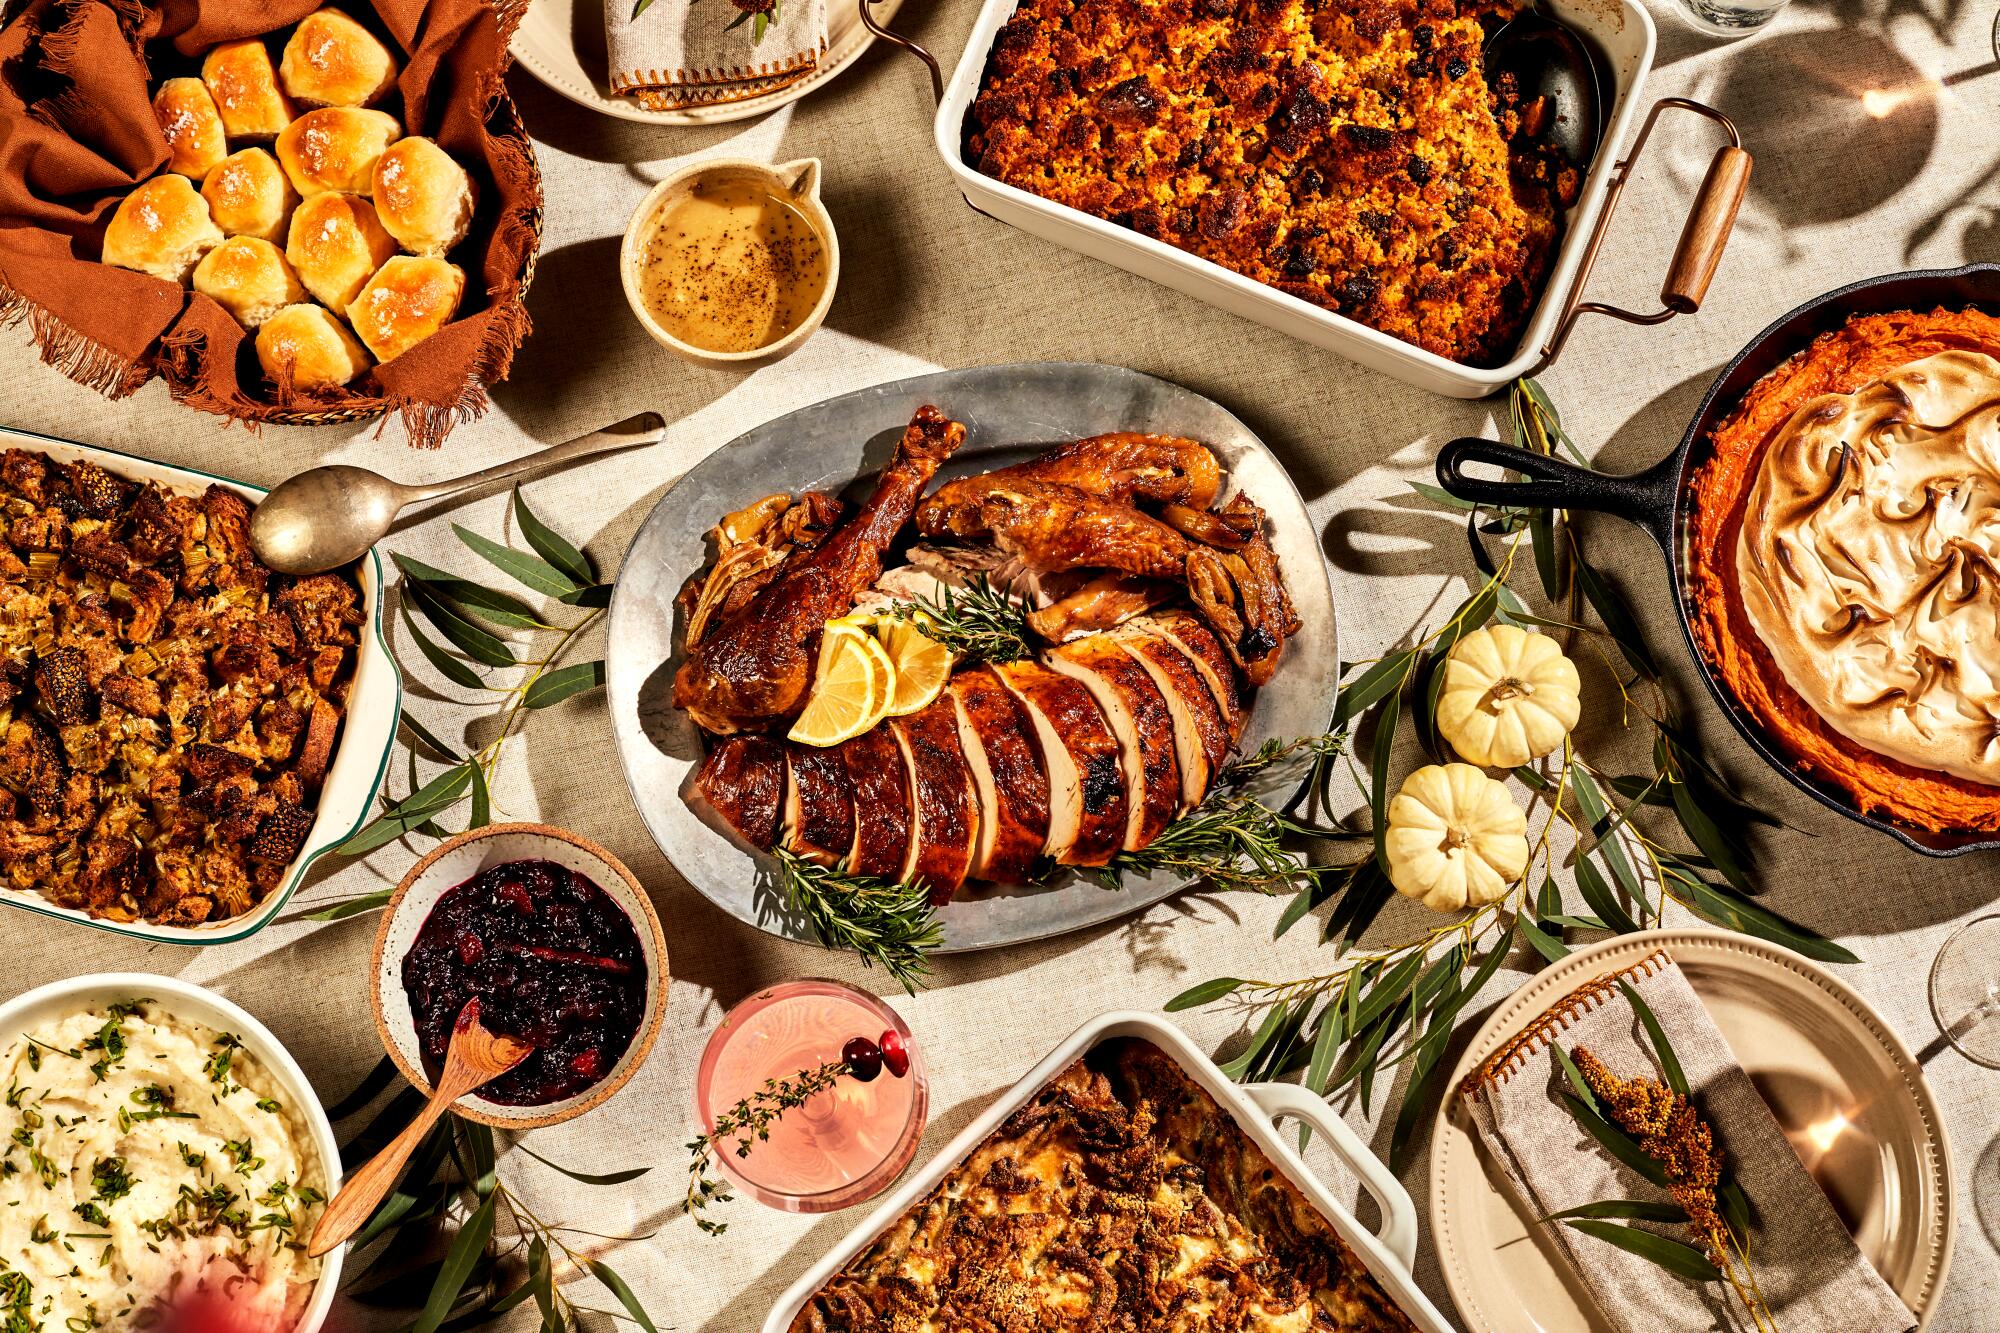 Roast turkey, green bean gratin, plus three stellar pies and more — all the classic Thanksgiving recipes you'll ever need.